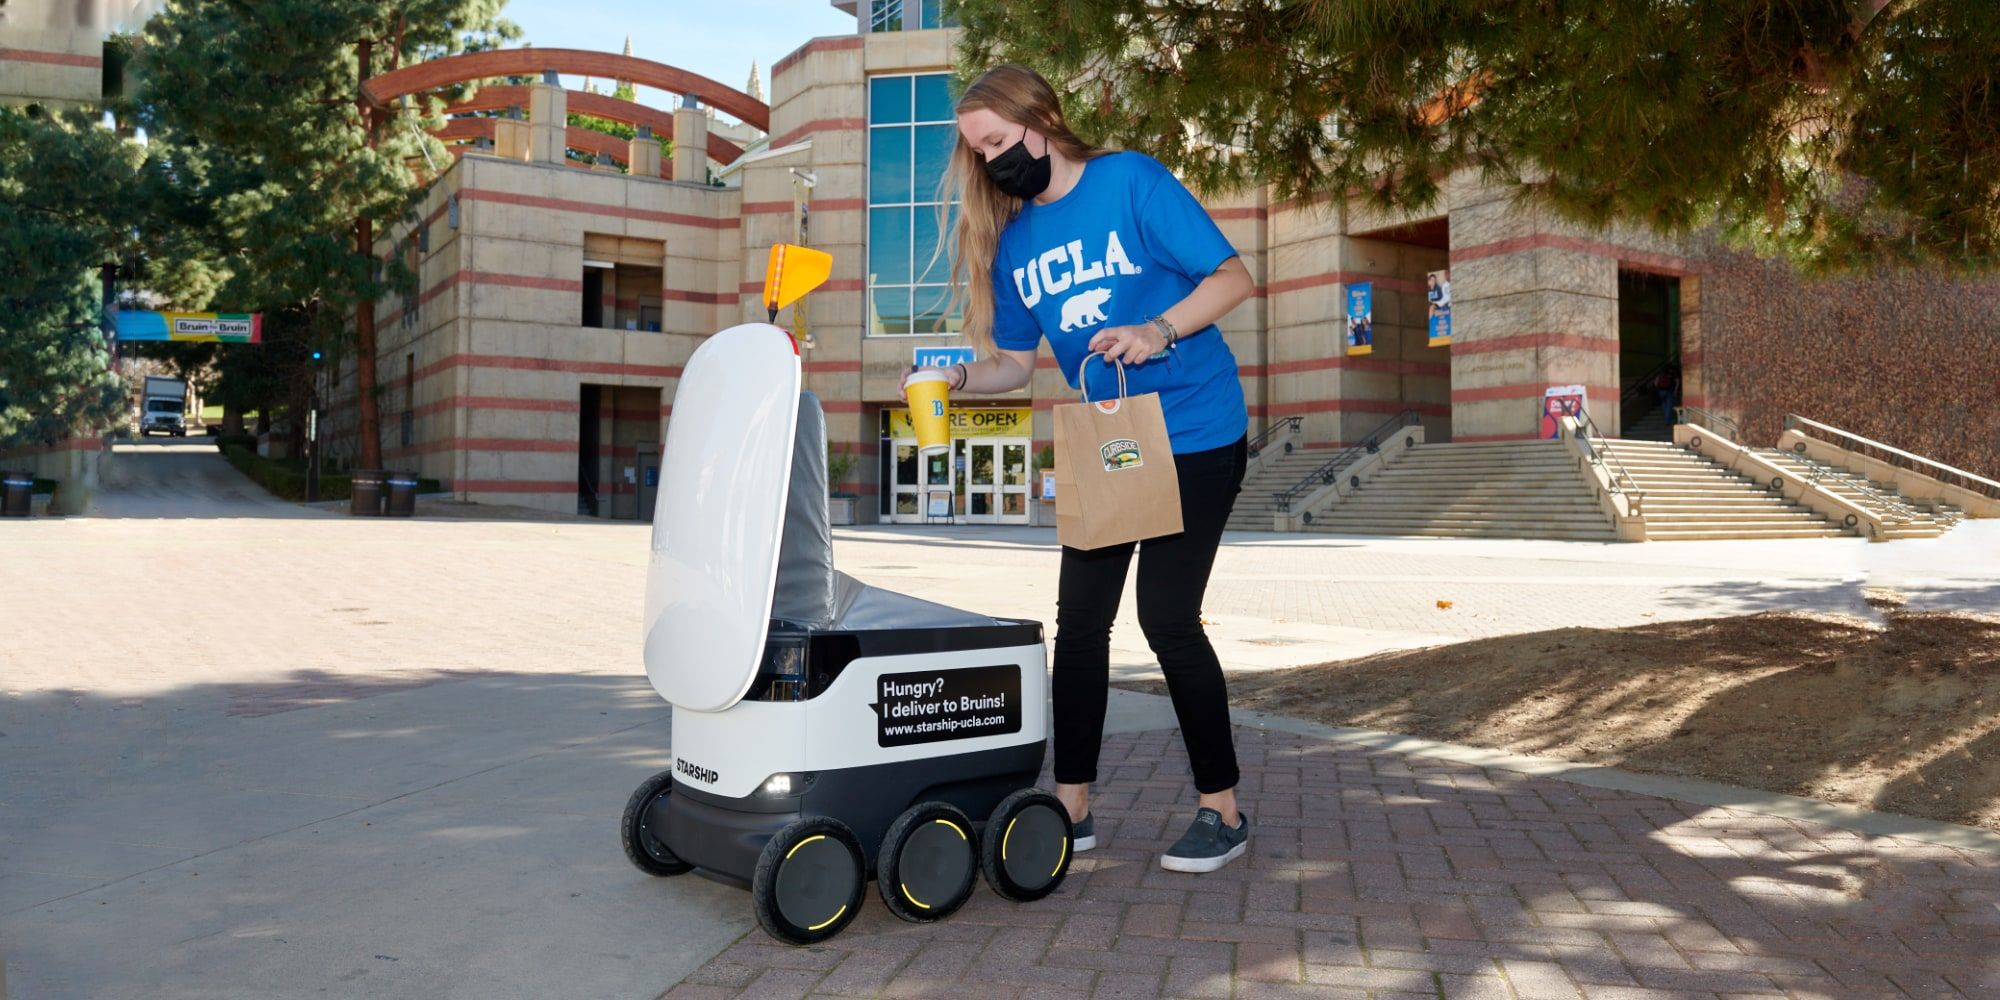 Electric Delivery Robots Cut Emissions By Saving 280,000 Car Trips In One Town